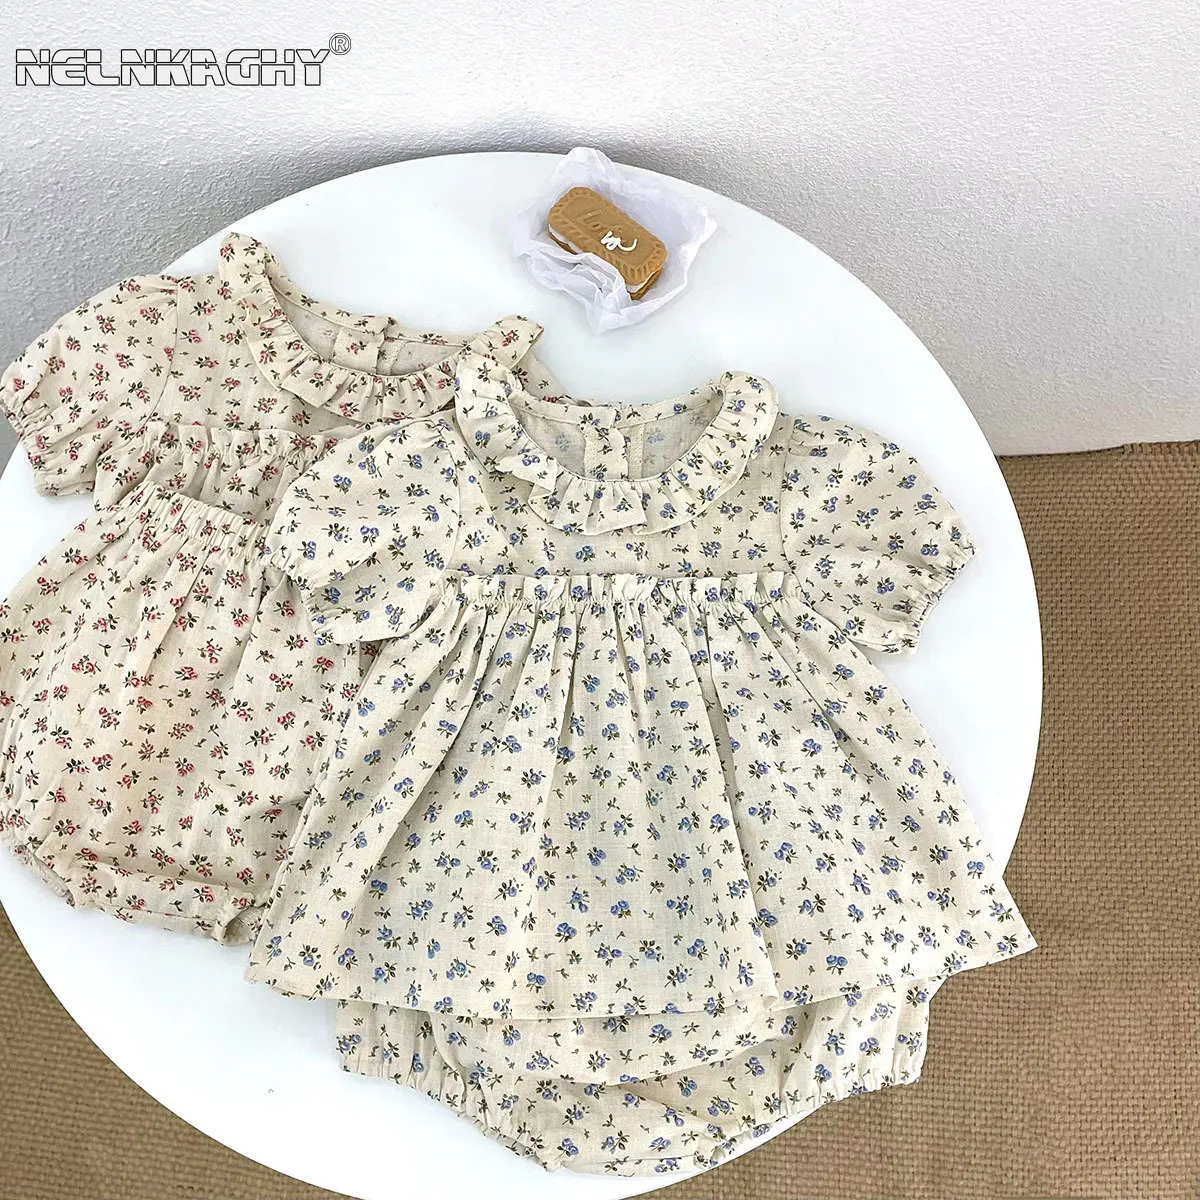 Kids Baby Girls Summer Short Sleeve Floral Ruched Top Tees T-shirts+bottoms Large PP Shorts Infant Newborn Clothing Set 2pcs